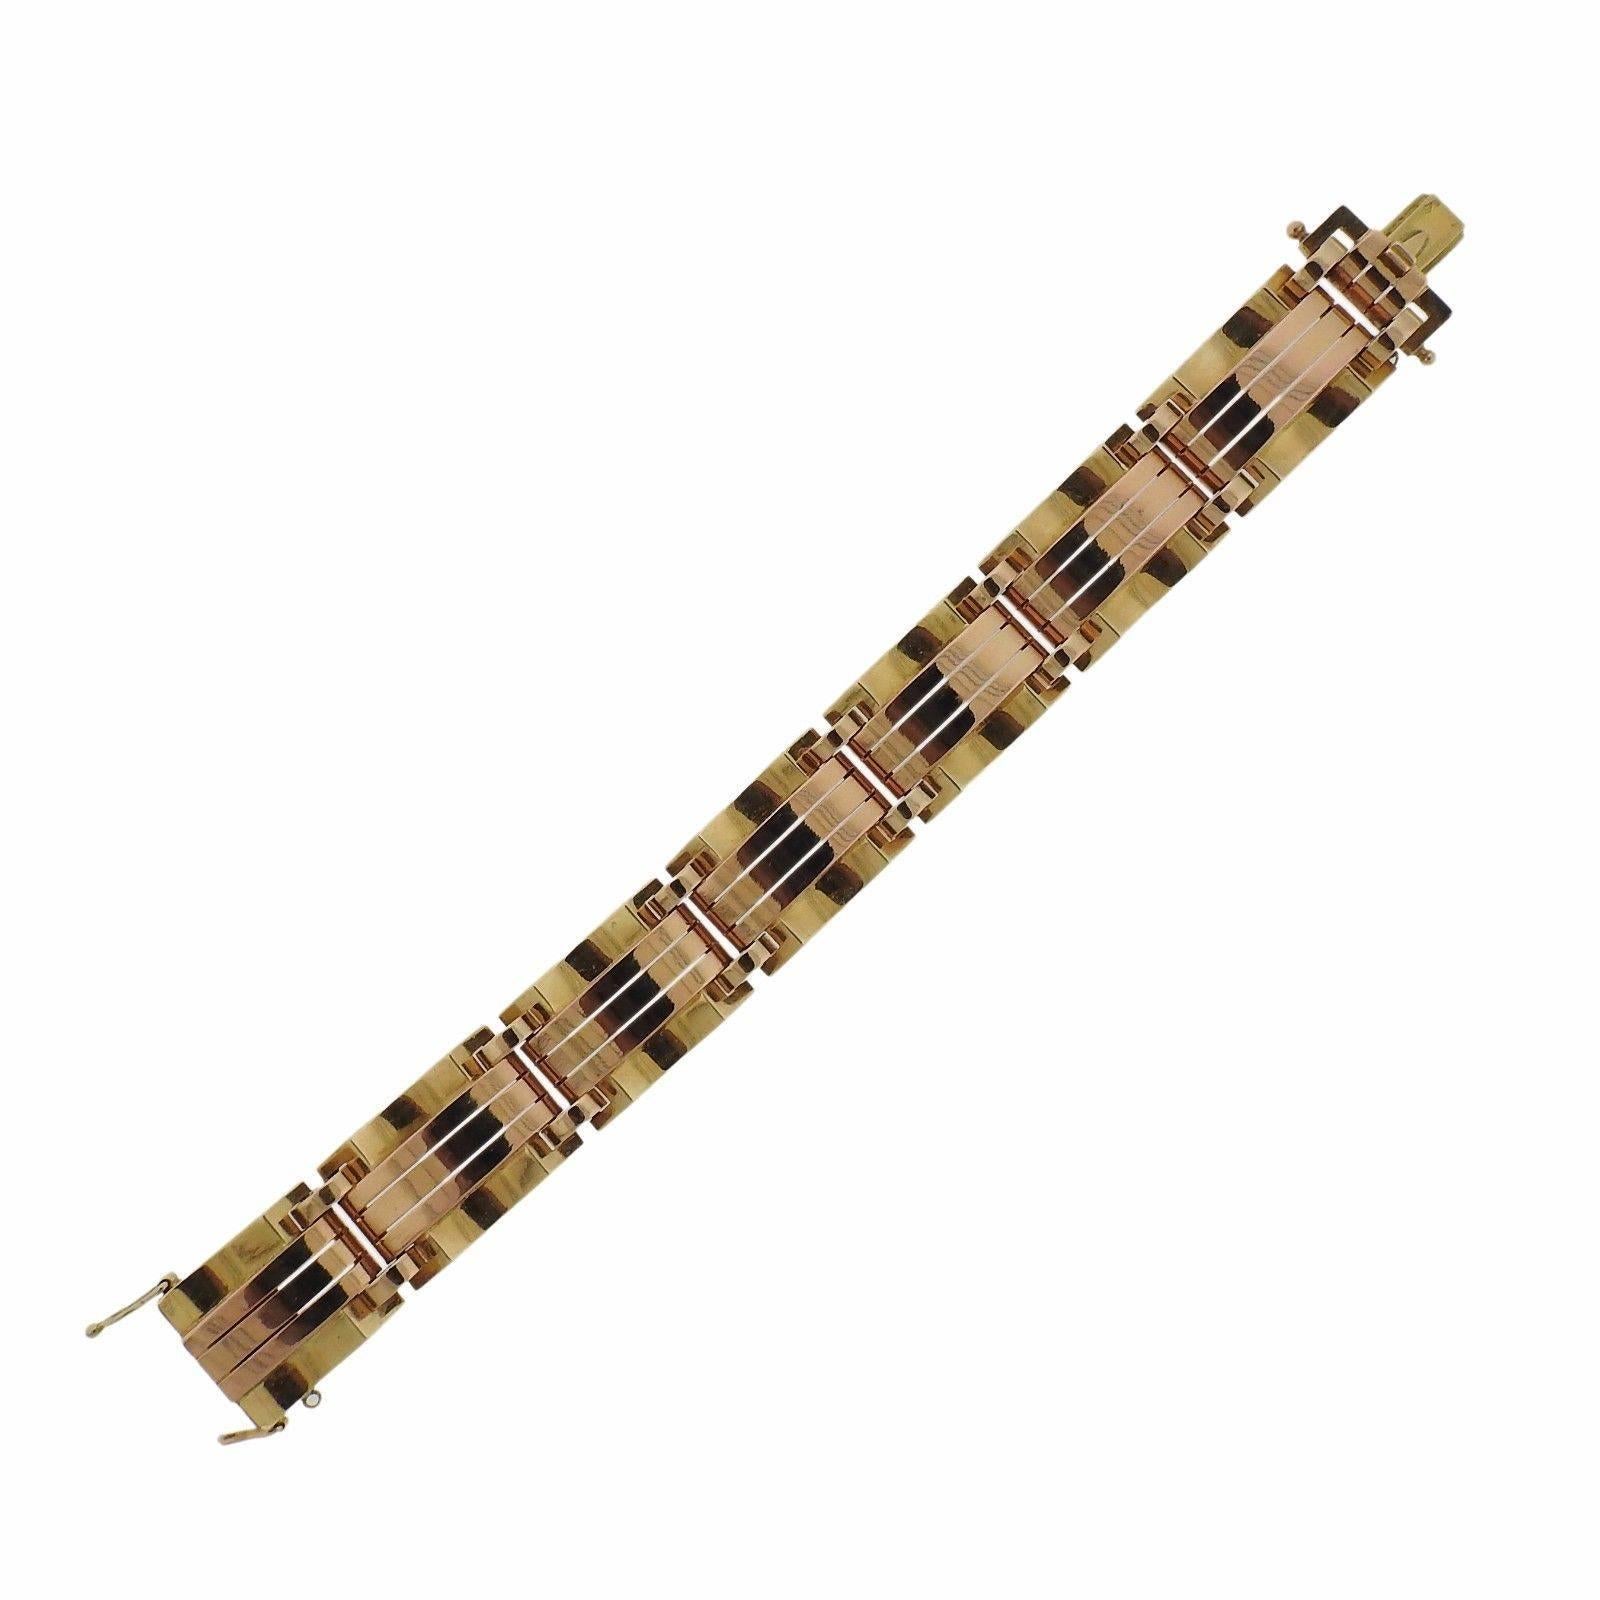 A 14k yellow and rose gold bracelet.  The bracelet is 7 1/8" long and 18mm wide.  The weight of the piece is 61.1 grams.  Marked with European gold assay marks.